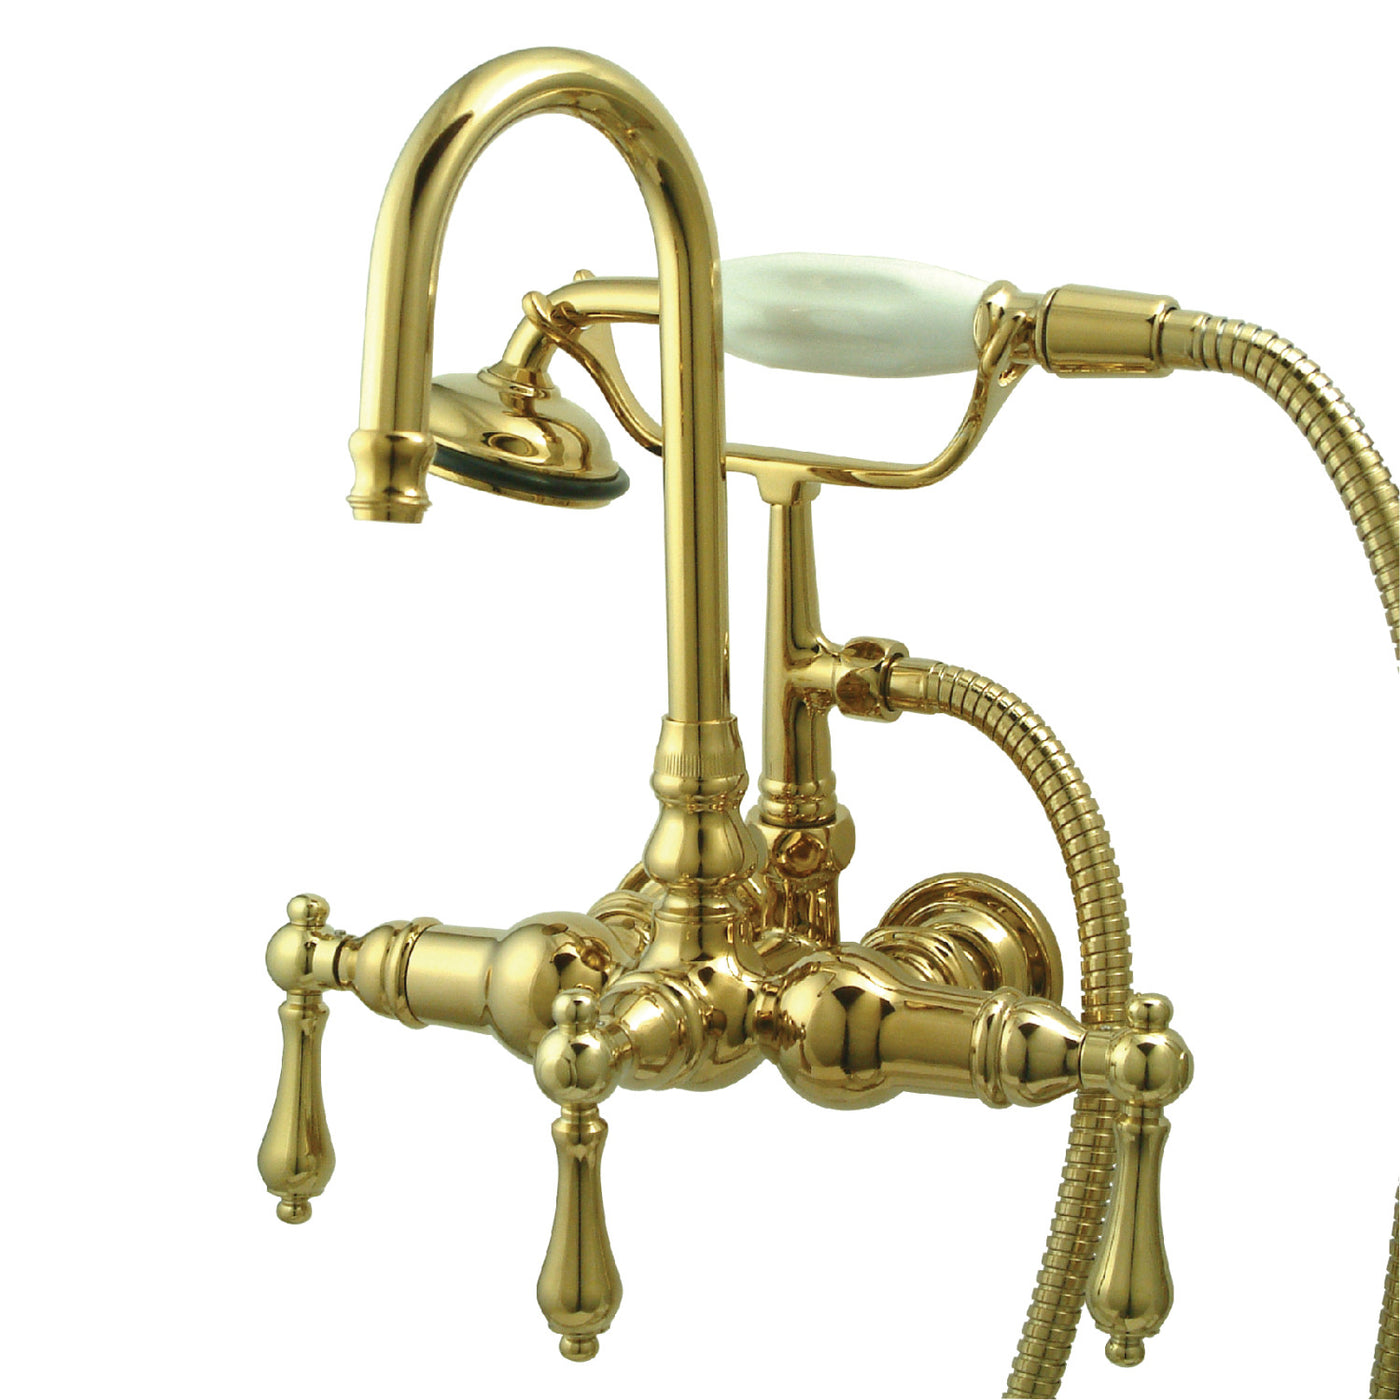 Elements of Design DT0072AL 3-3/8" Wall Mount Tub Faucet with Hand Shower, Polished Brass